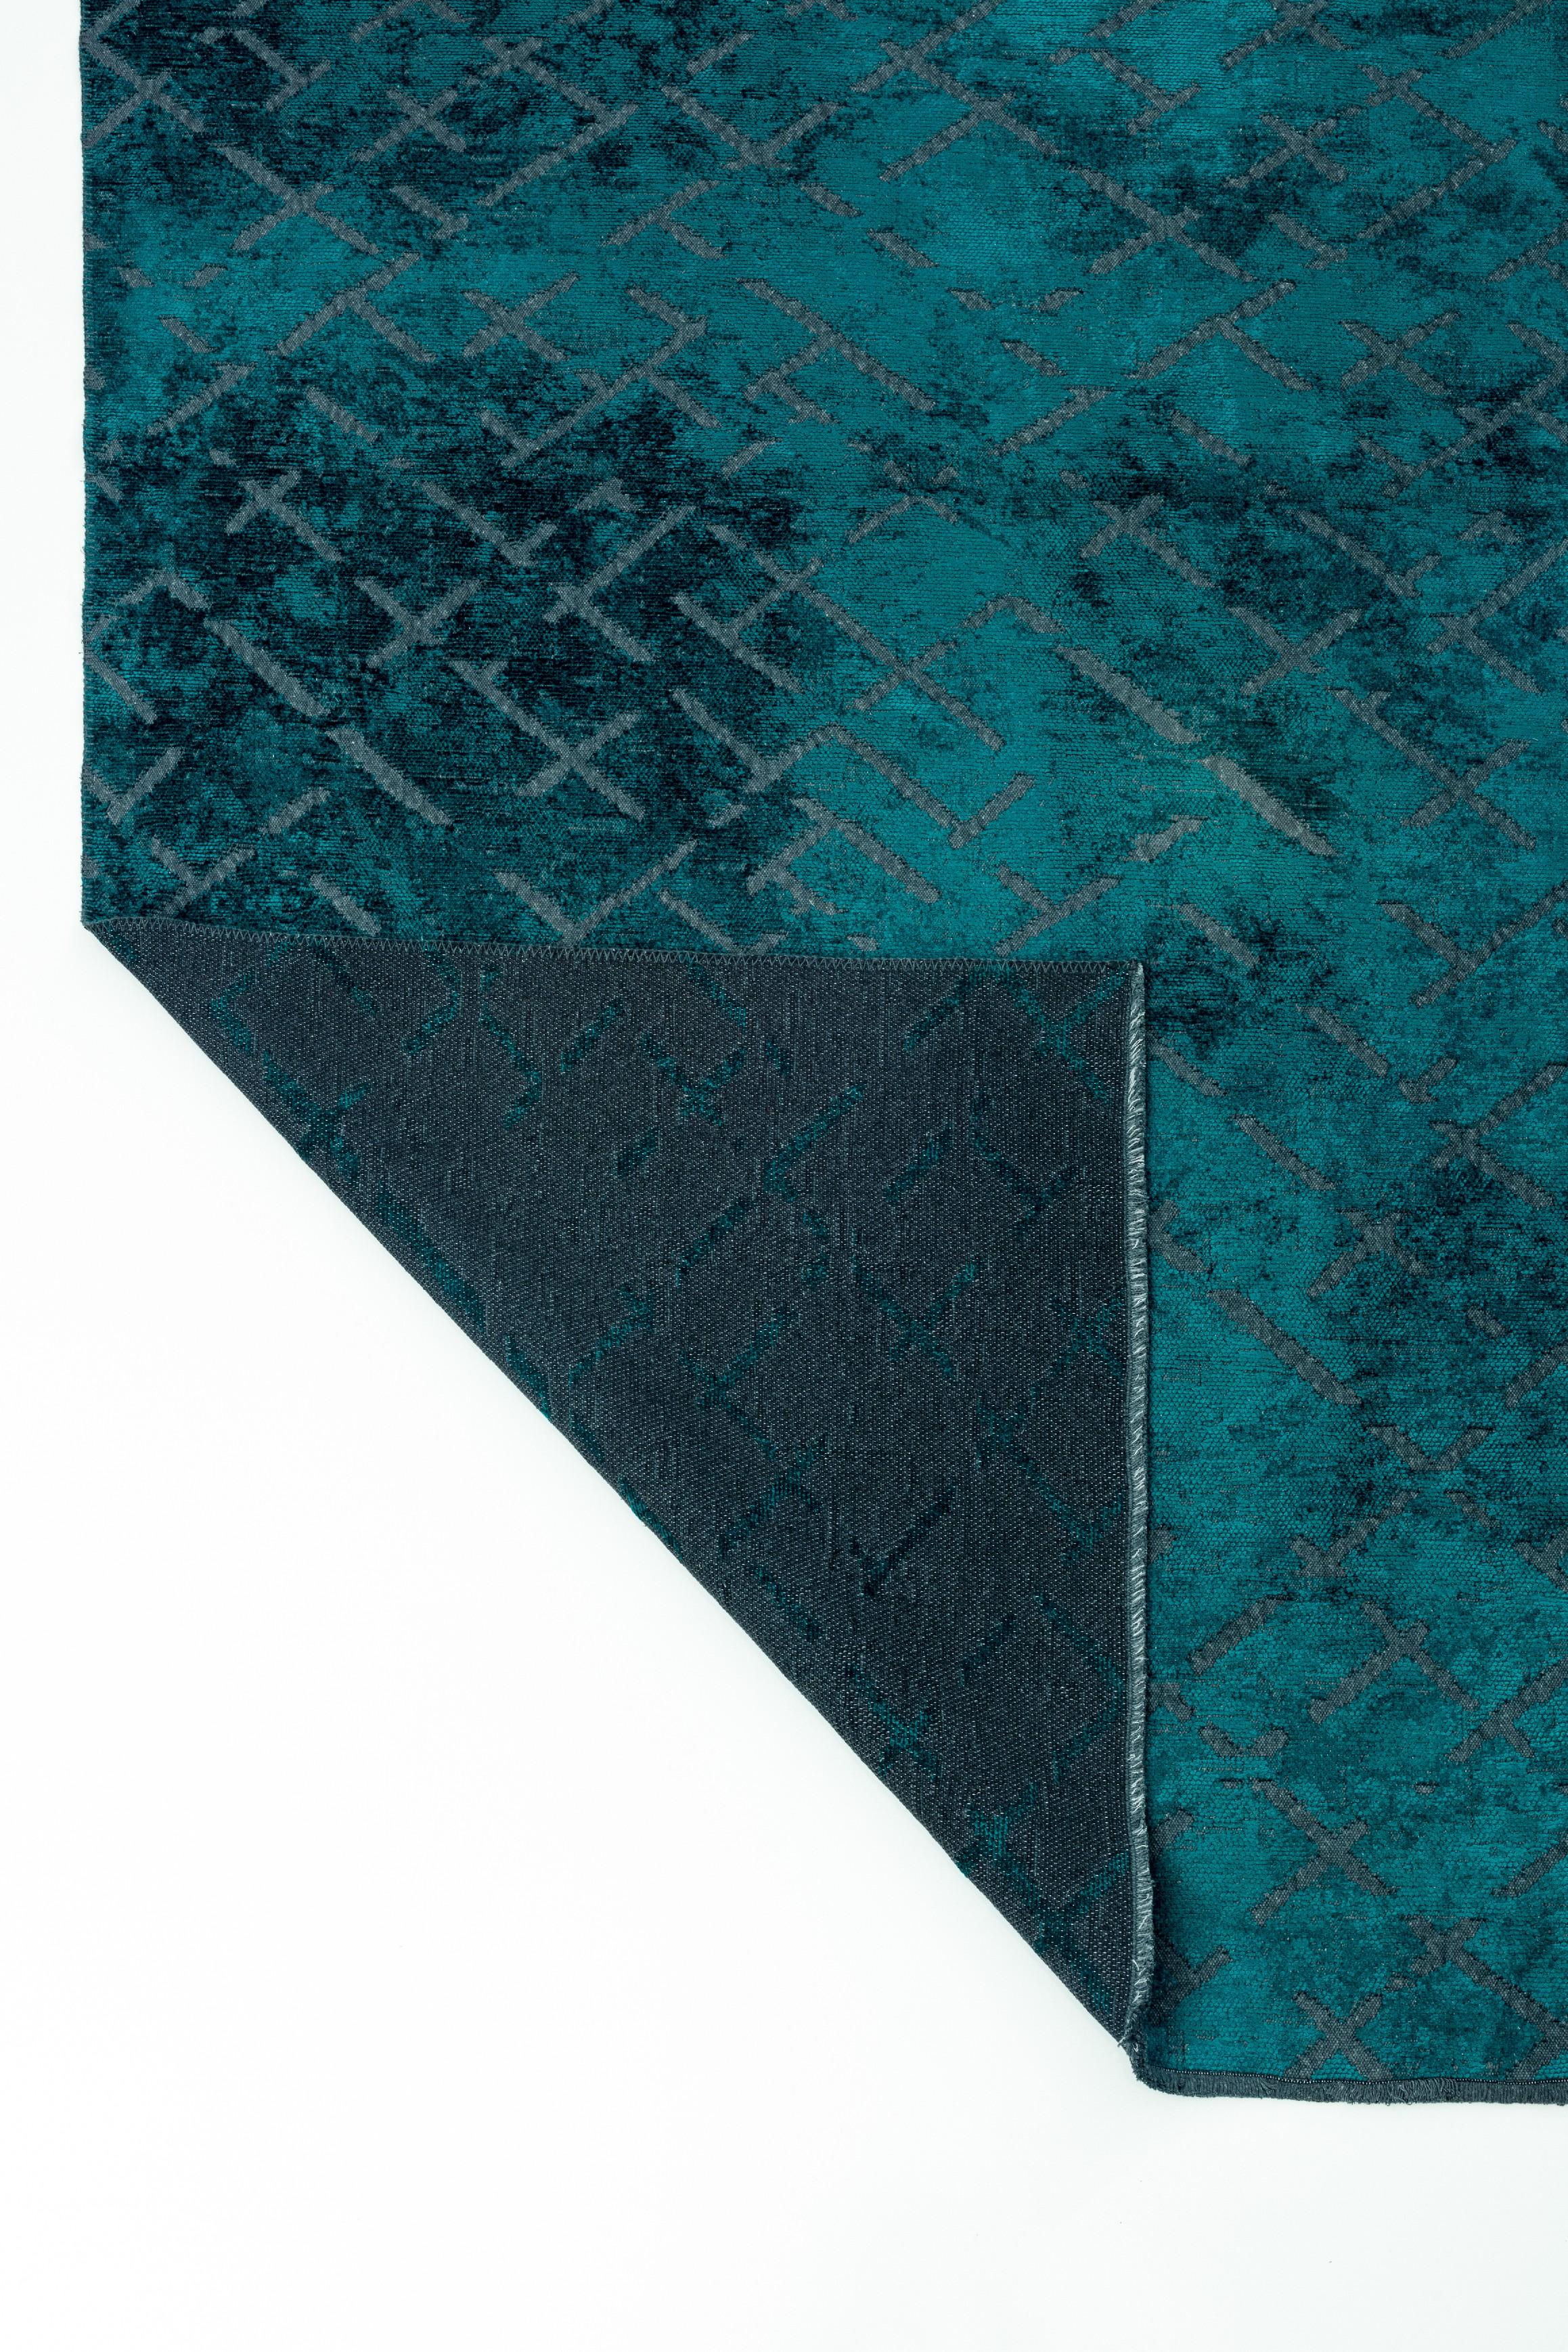 For Sale:  (Green) Modern  Abstract Luxury Hand-Finished Area Rug 3